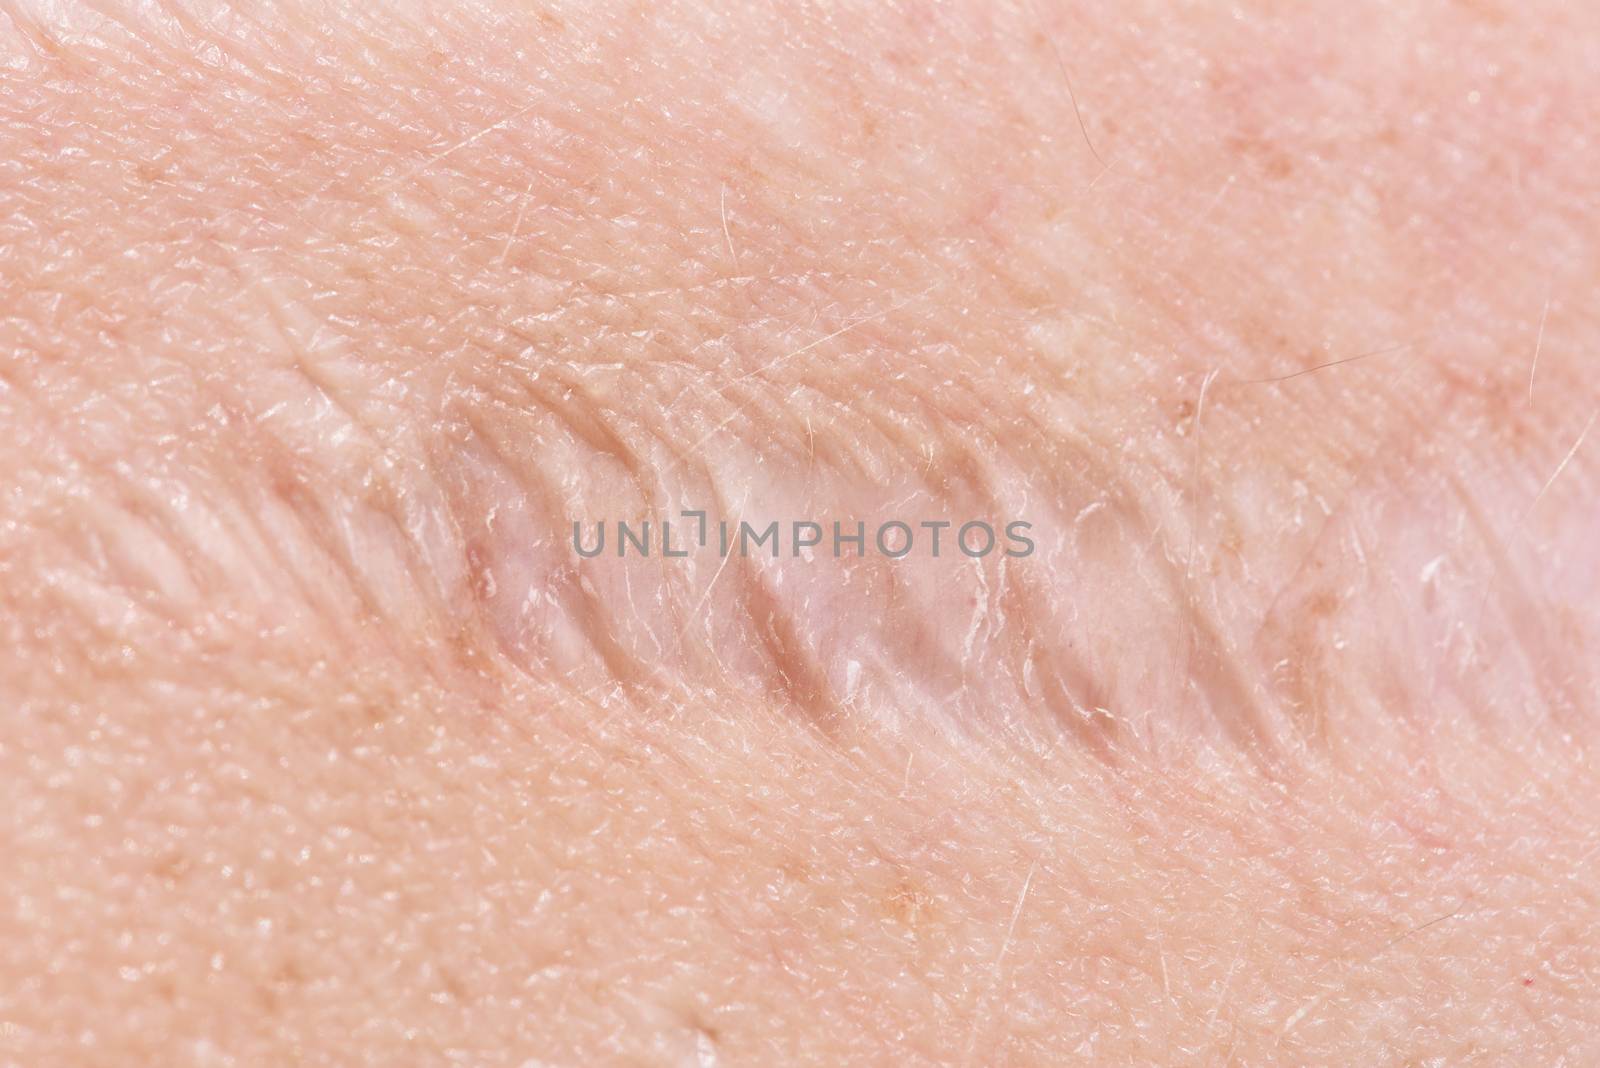 Scar on the skin. Human scar close-up